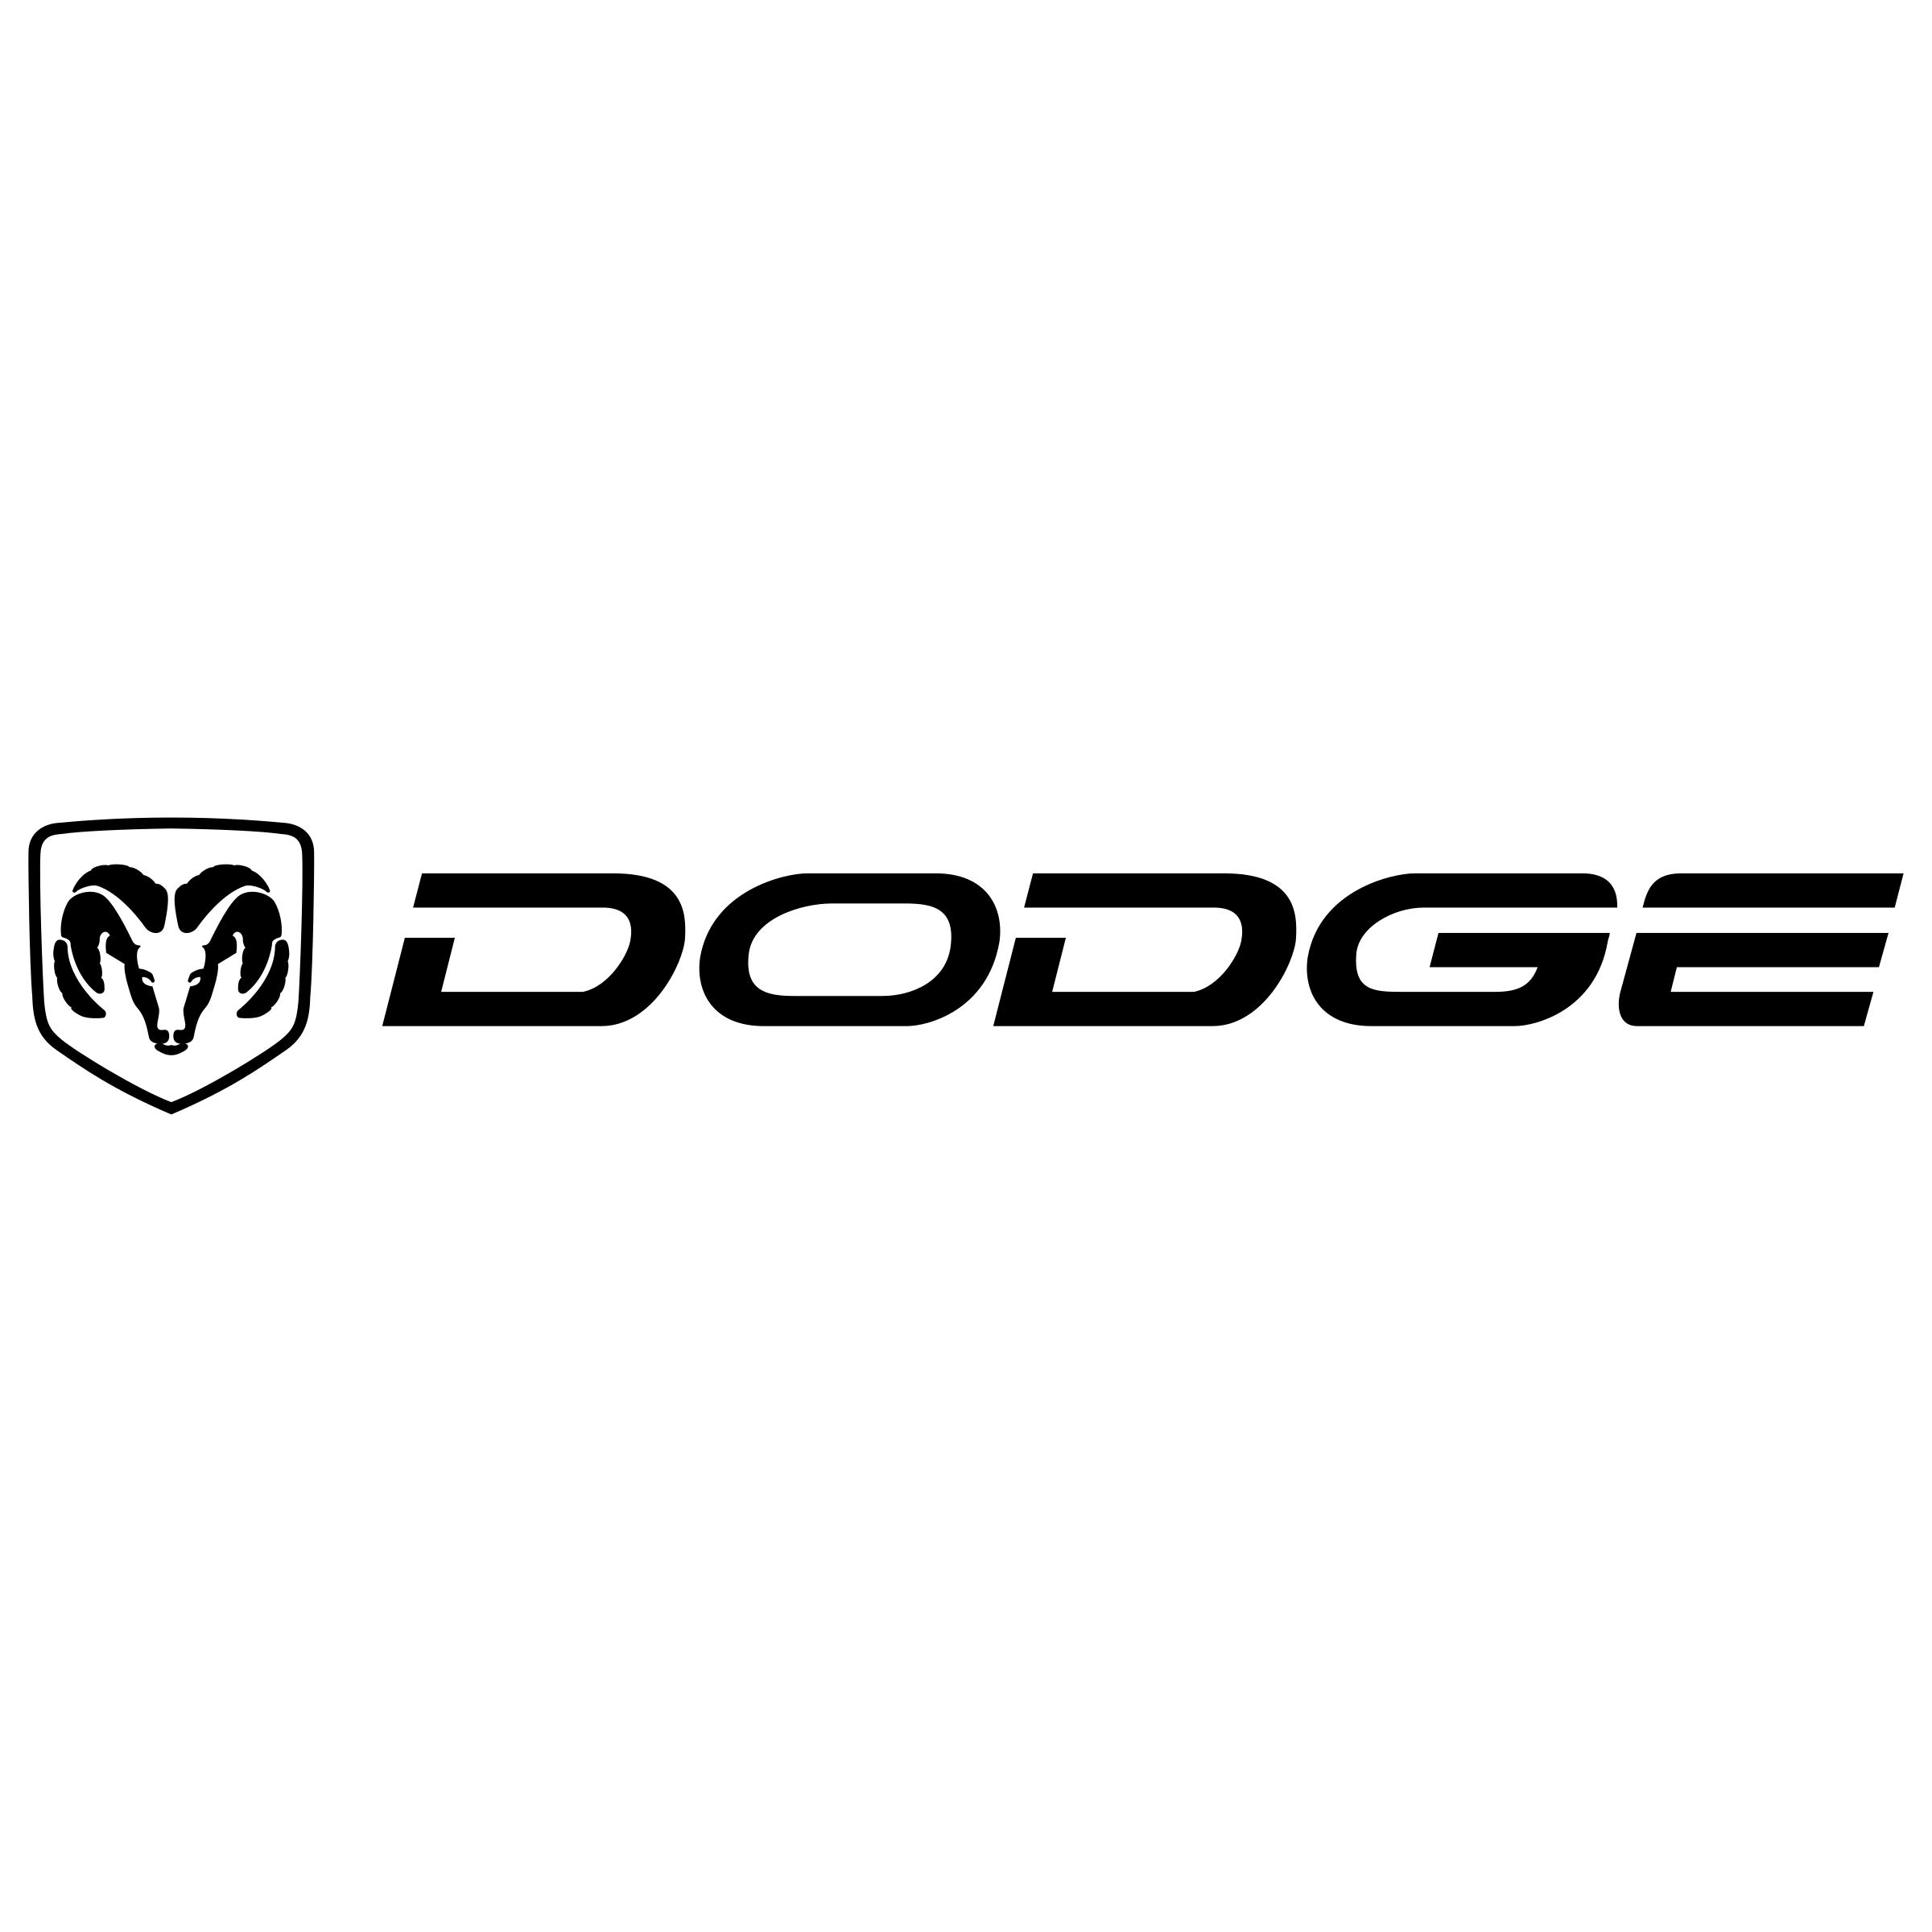 Dodge Logo, Hd Png, Meaning, 